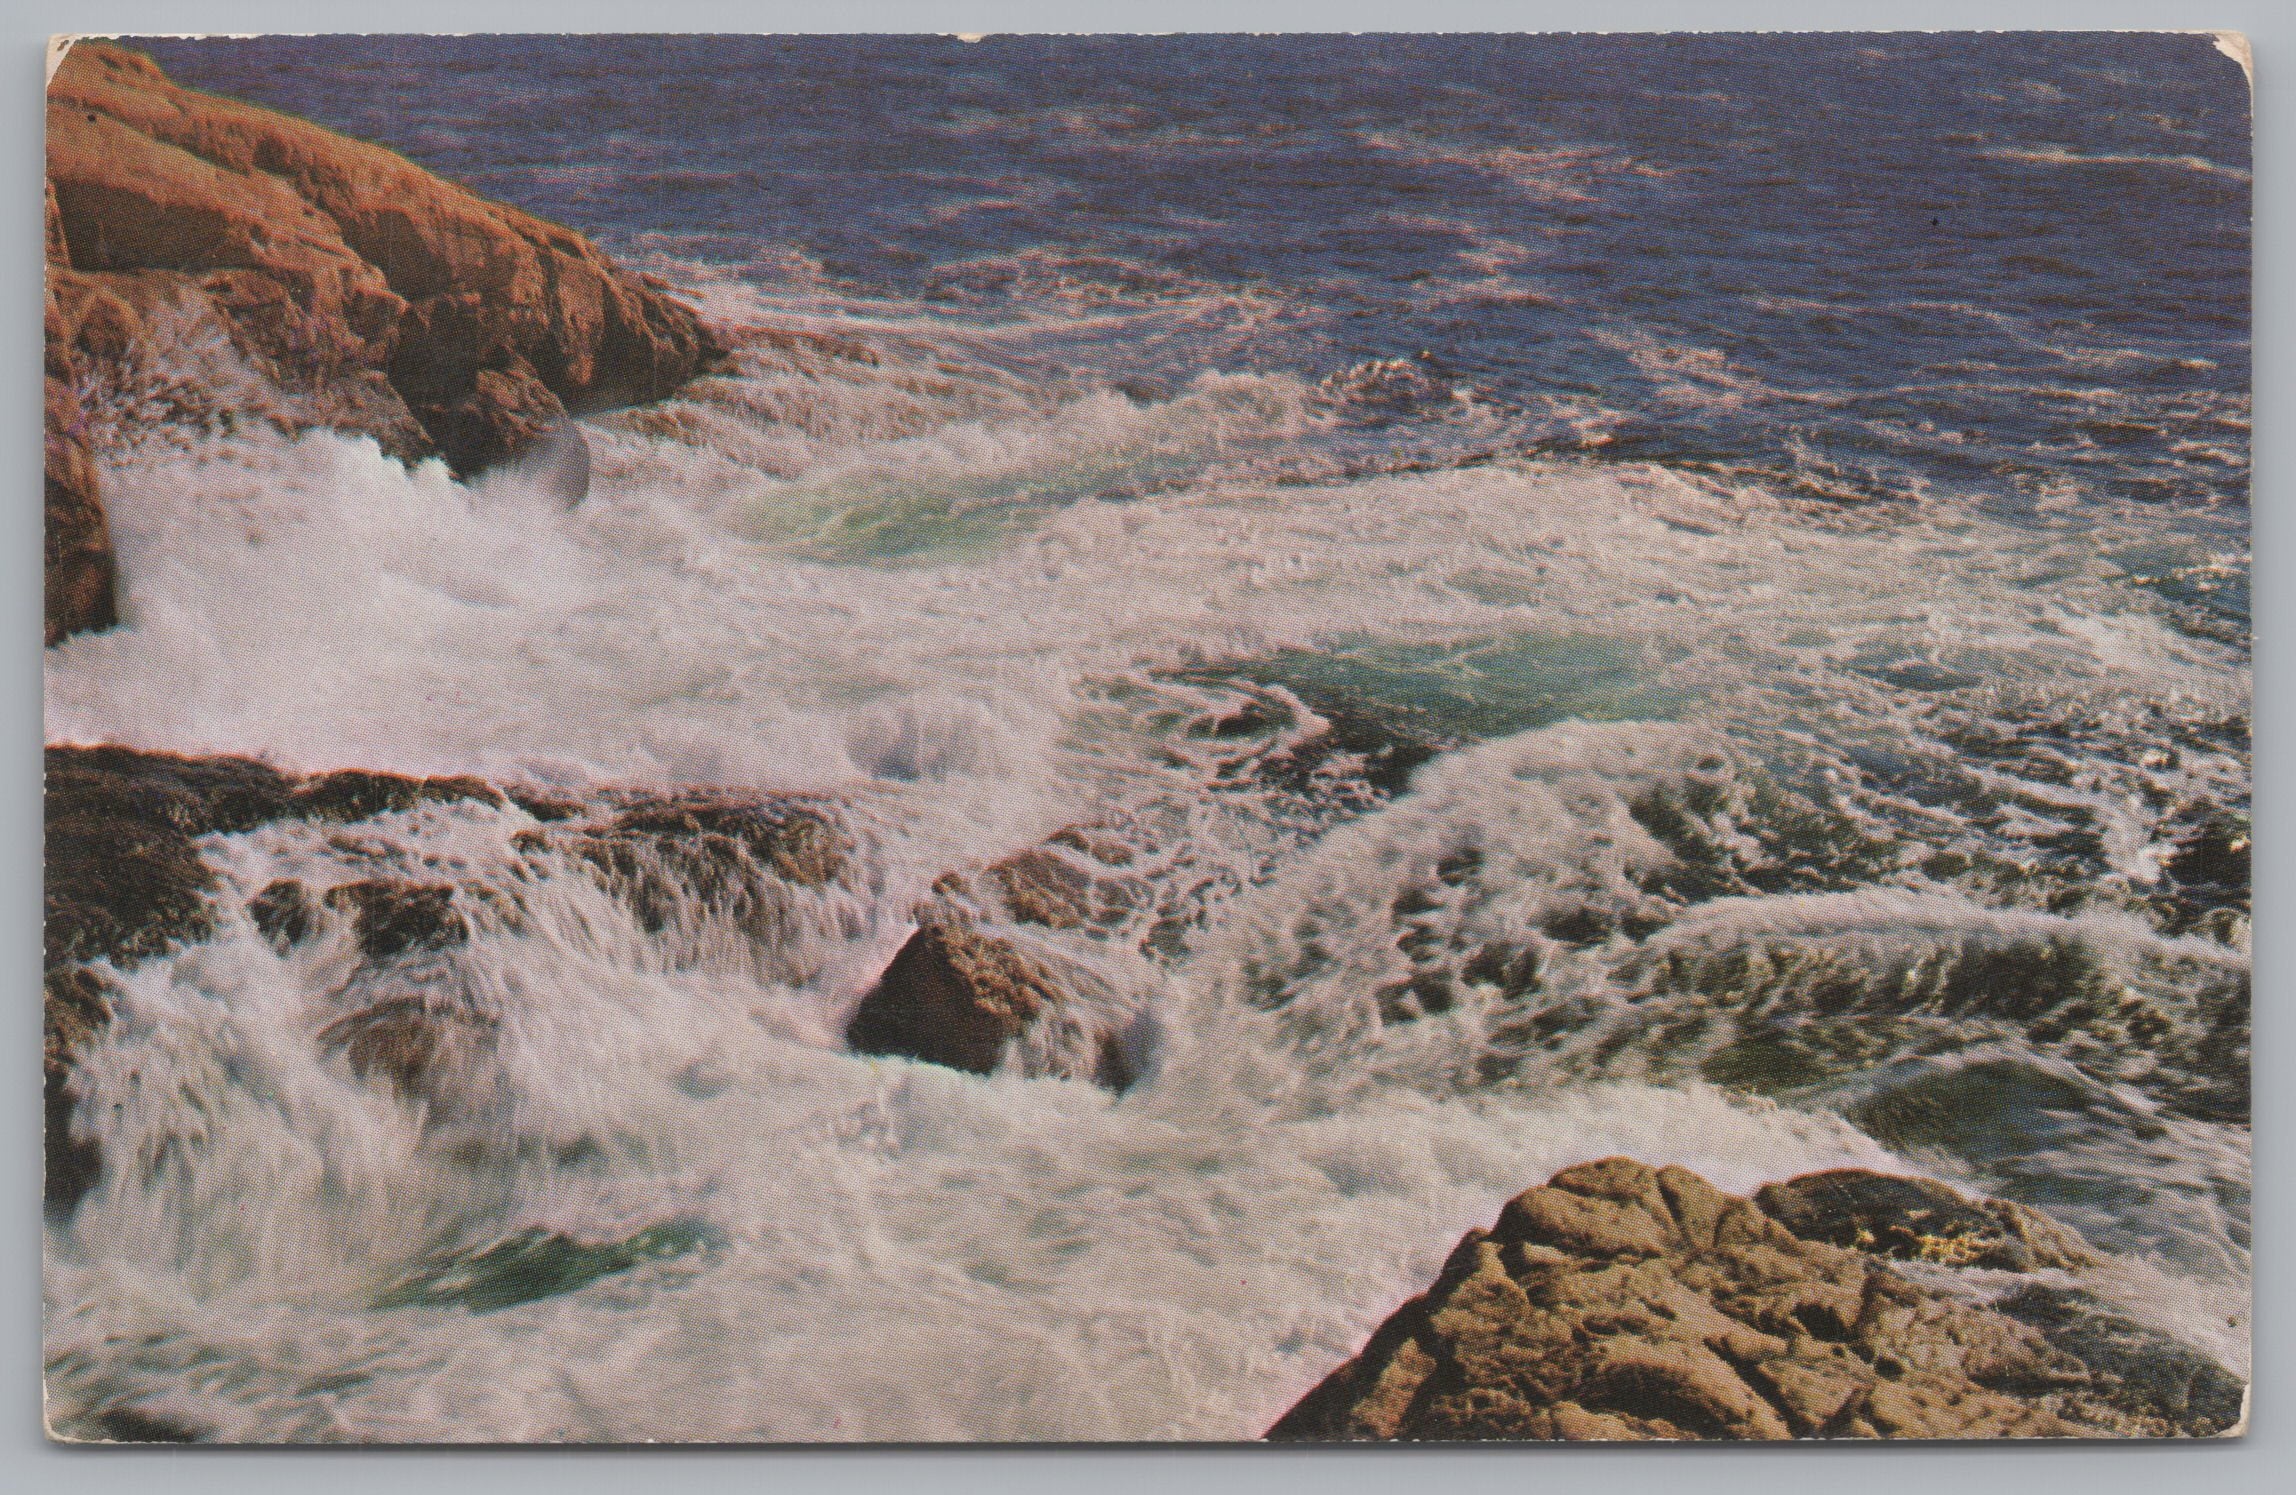 Foaming Surf Waves On A Rocky Coast, Vintage Post Card.